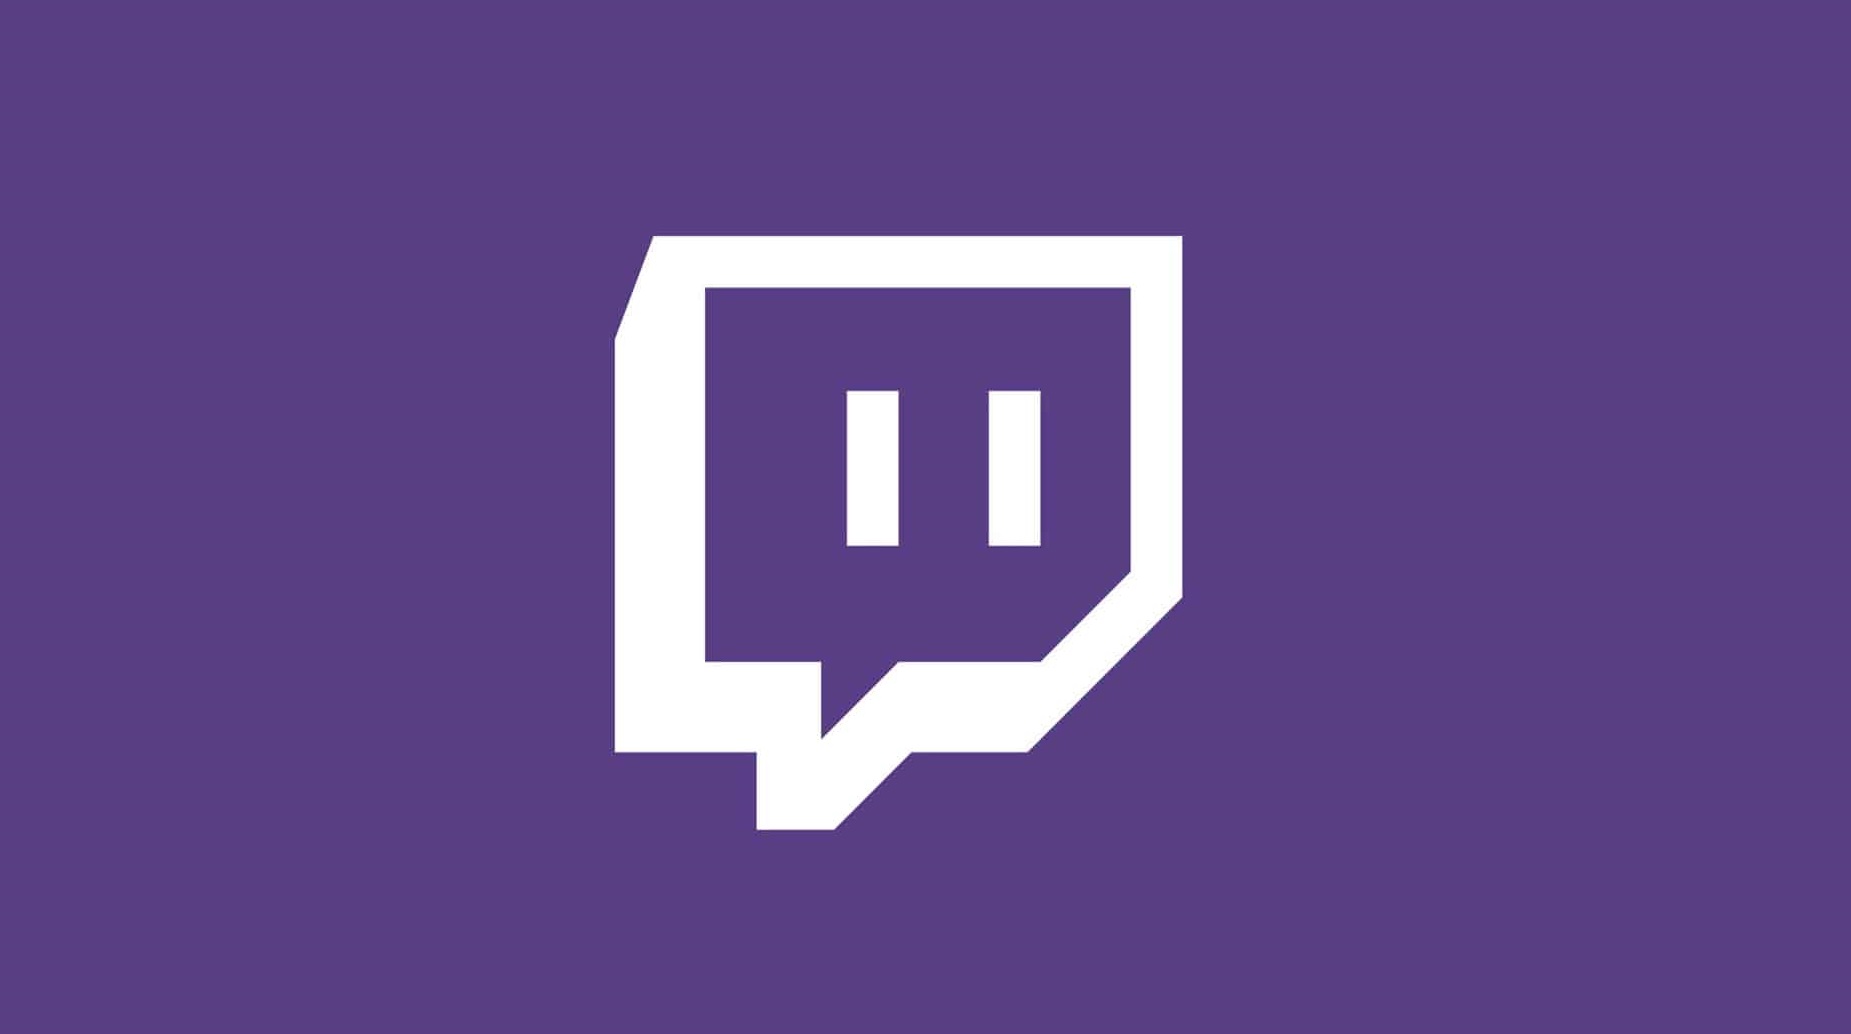 twitch streaming software xbox one